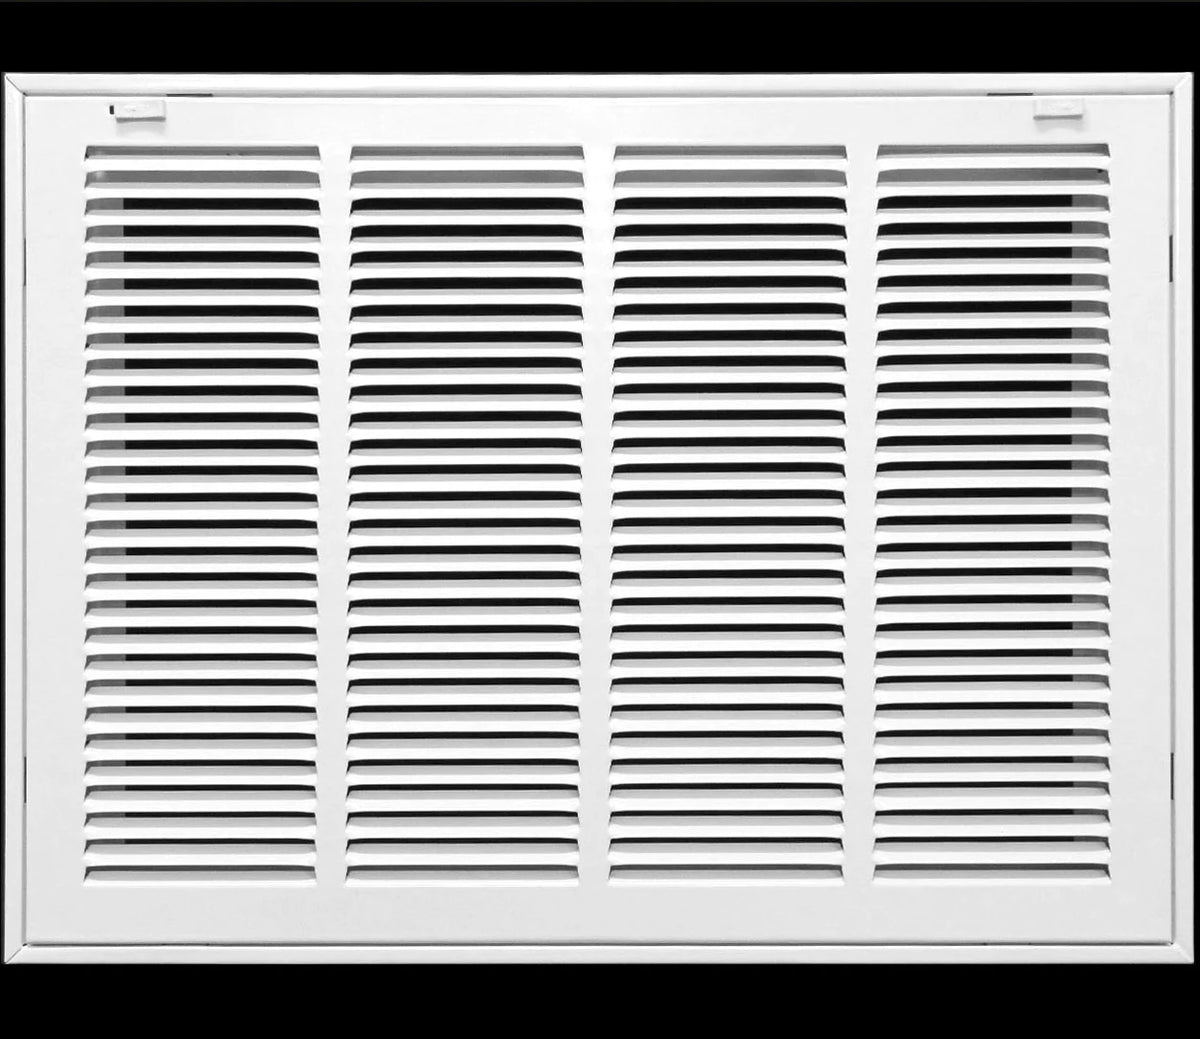 20&quot; X 12&quot; Steel Return Air Filter Grille for 1&quot; Filter - Removable Frame - [Outer Dimensions: 22 5/8&quot; X 14 5/8&quot;]